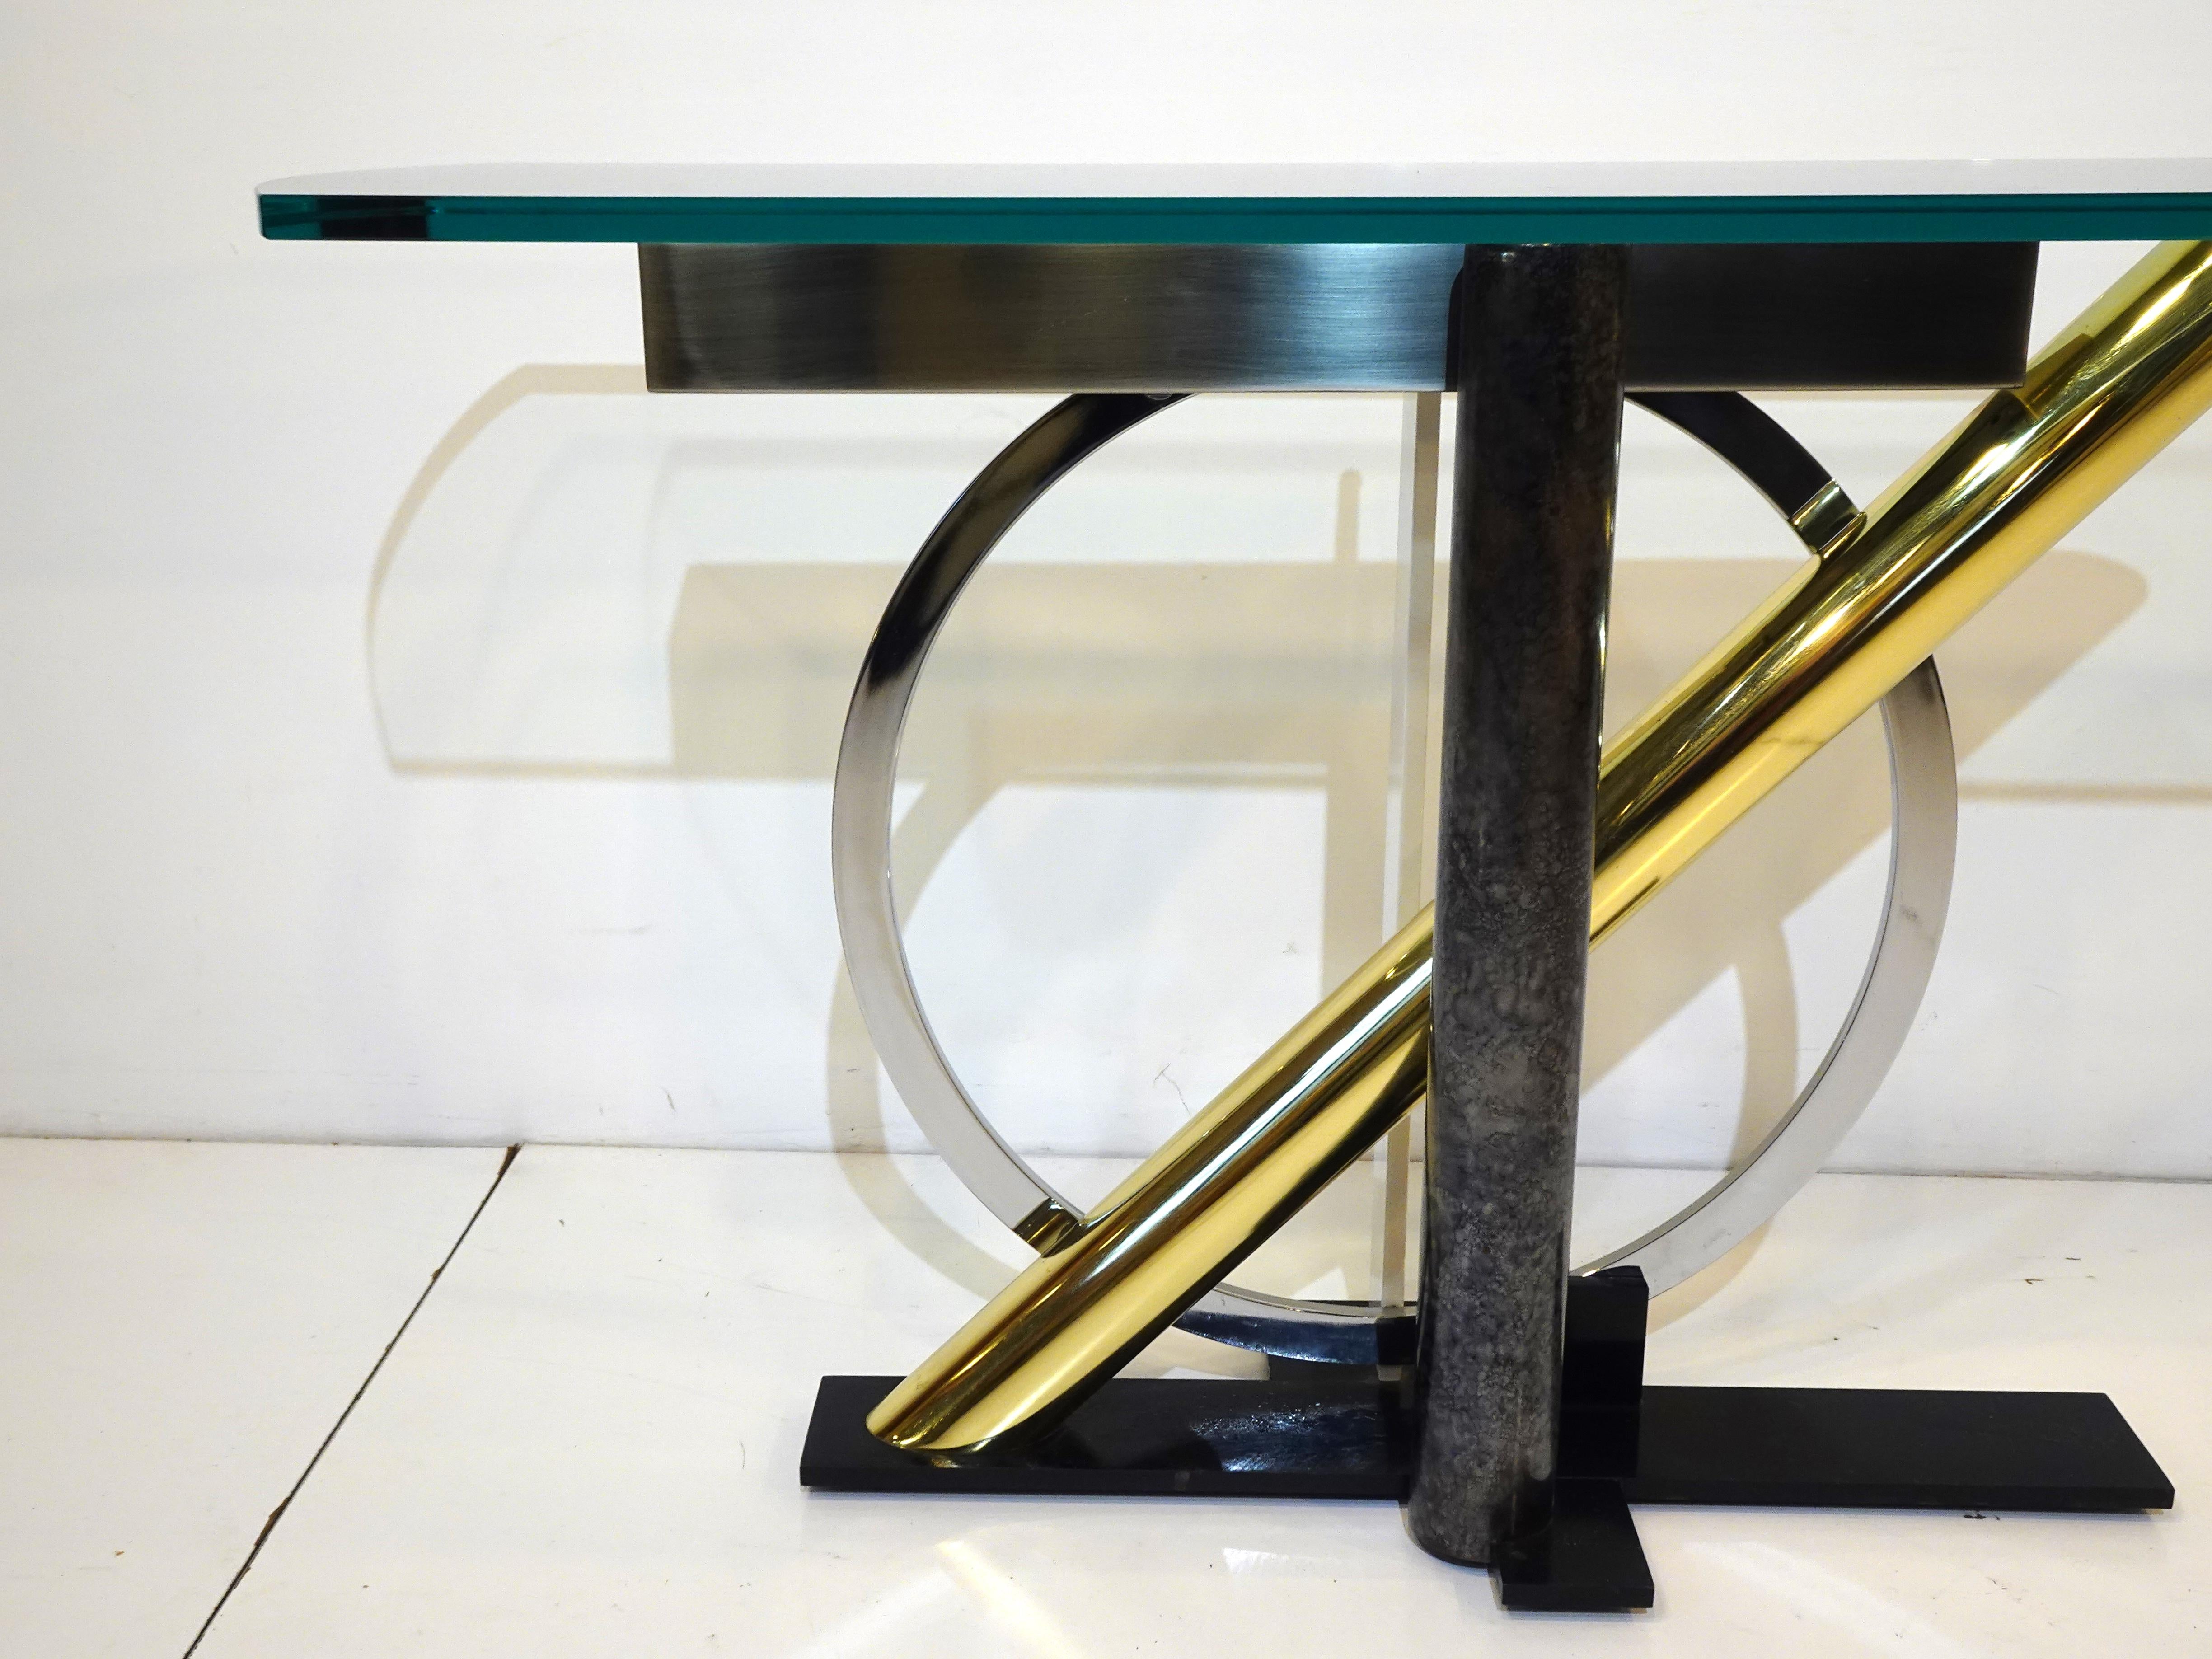 Kaizo Oto Mixed Metal / Glass Console Table for DIA In Good Condition For Sale In Cincinnati, OH